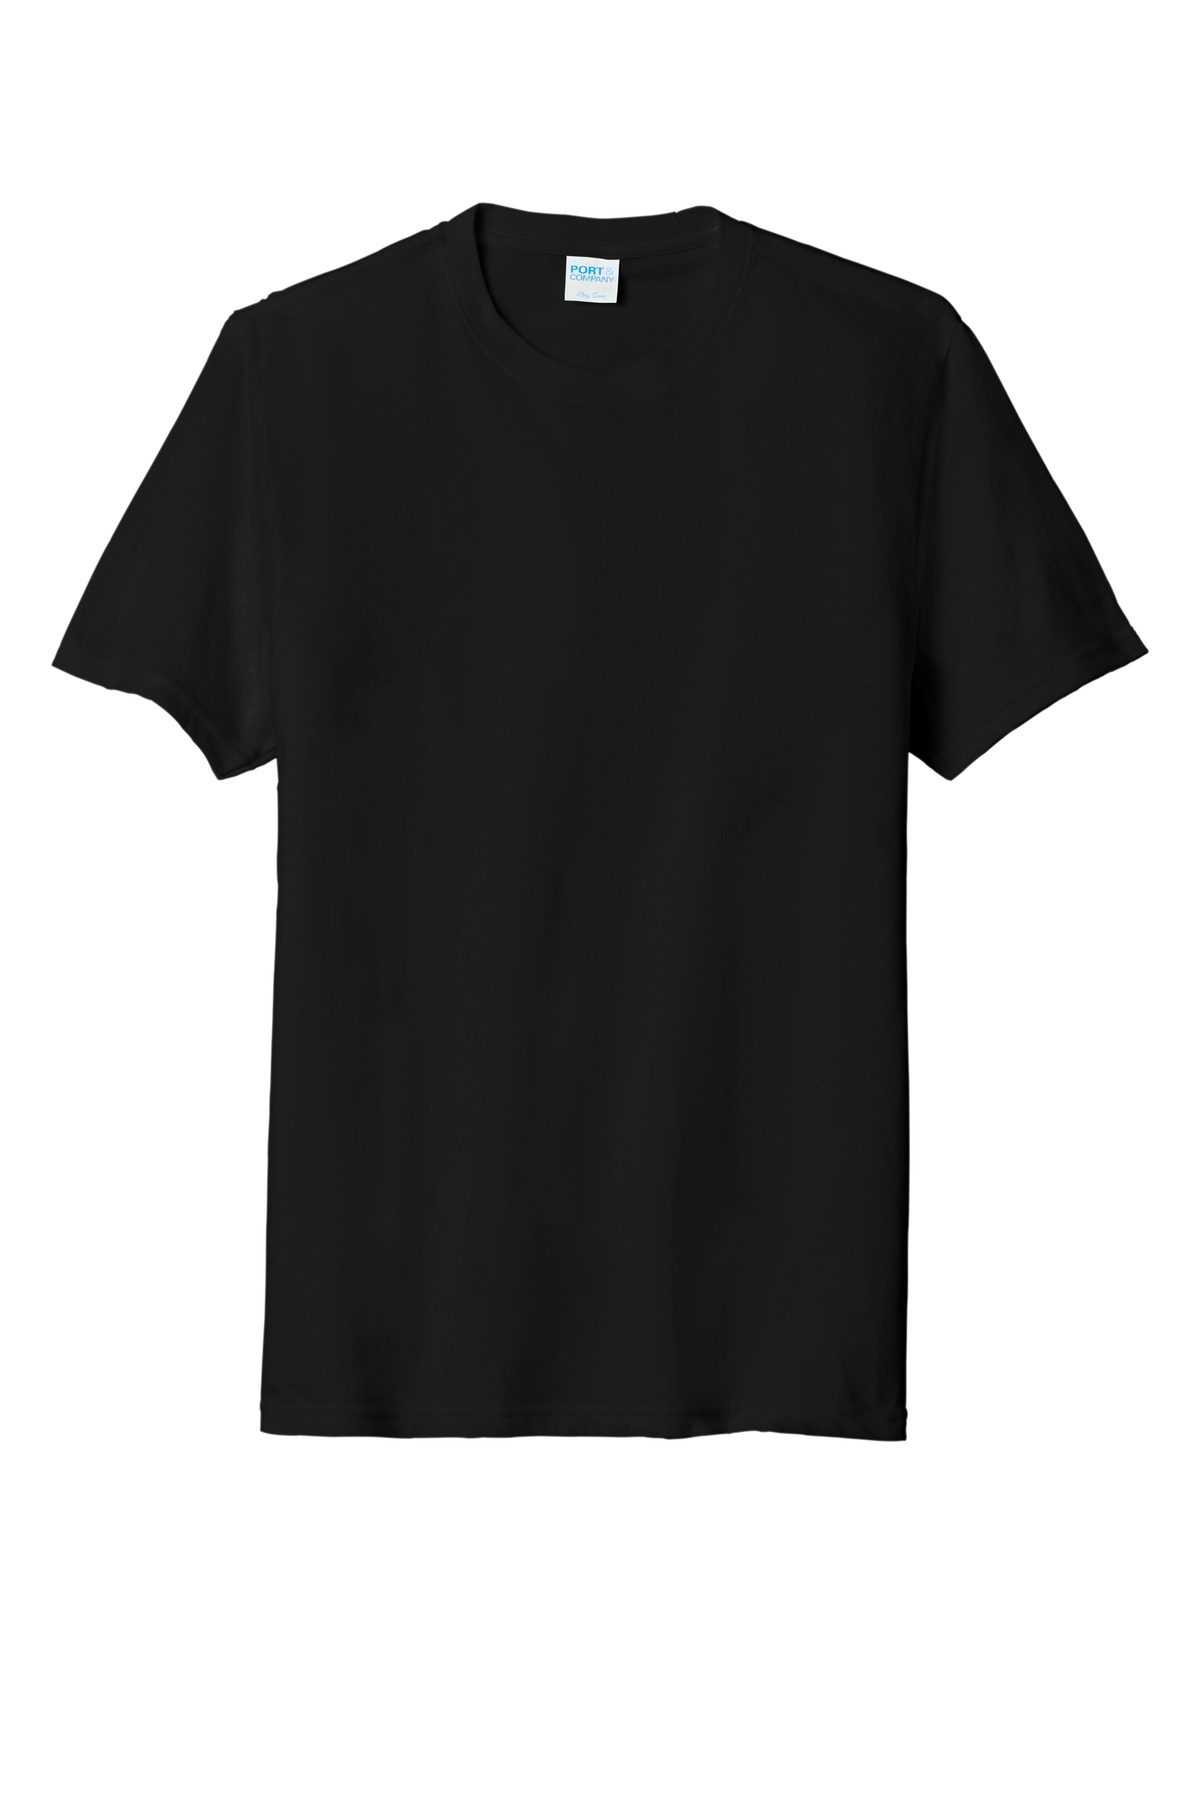 Port & Company ® Tri-Blend Tee. PC330 Questions & Answers